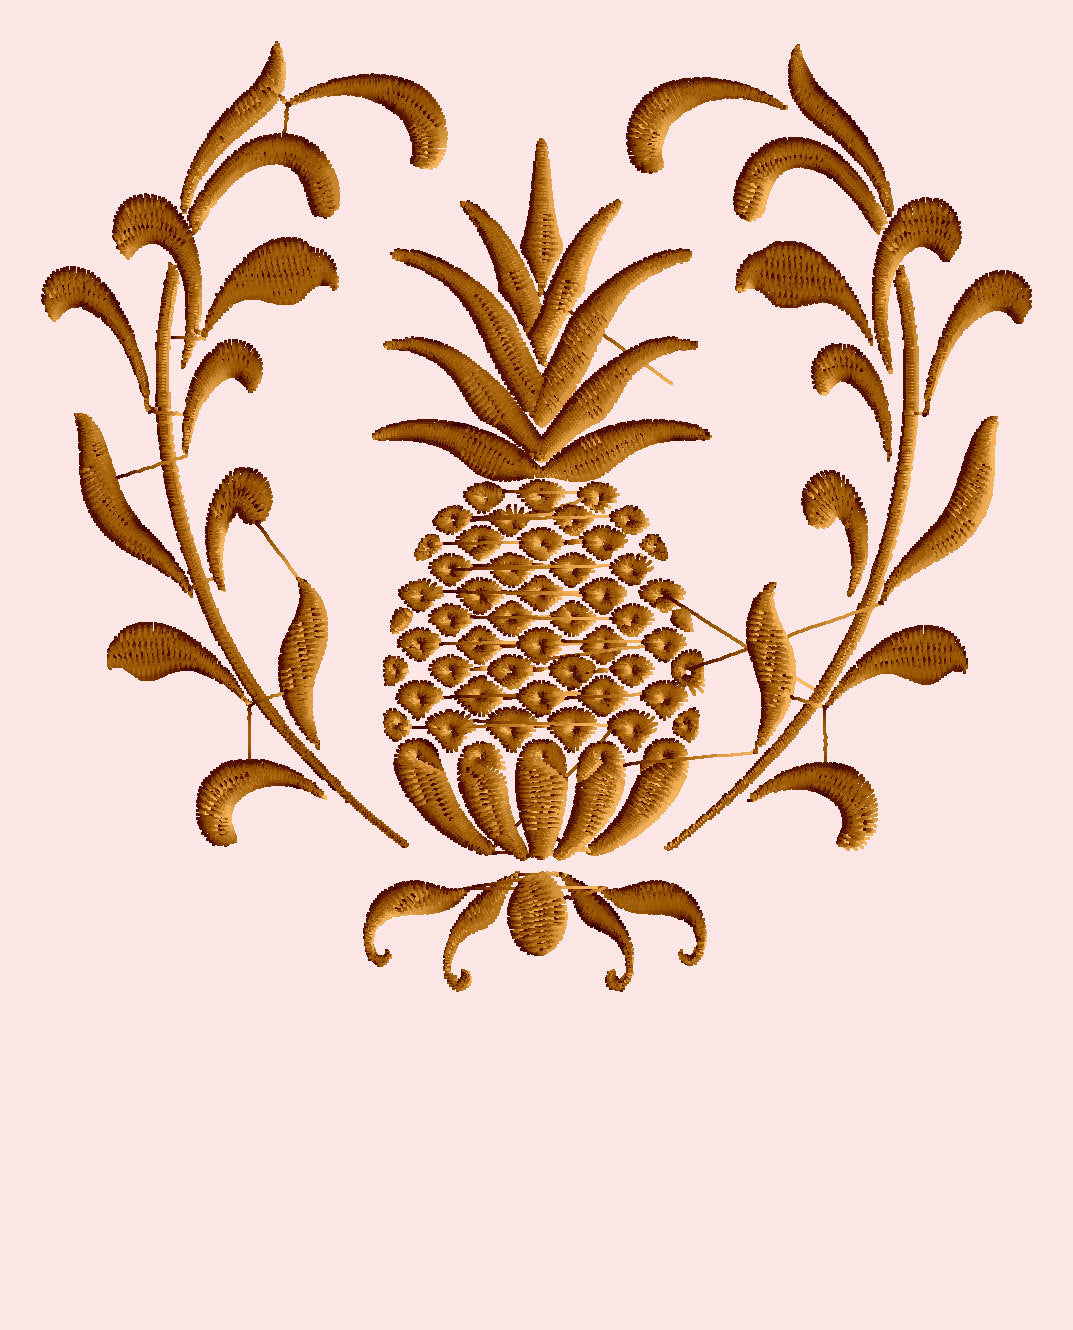 Pineapple Wreath Design - Welcome - Valentines day Heart and home - EMBROIDERY DESIGN FILE - Instant download - Dst Hus Jef Pes Exp formats $4.99 USD